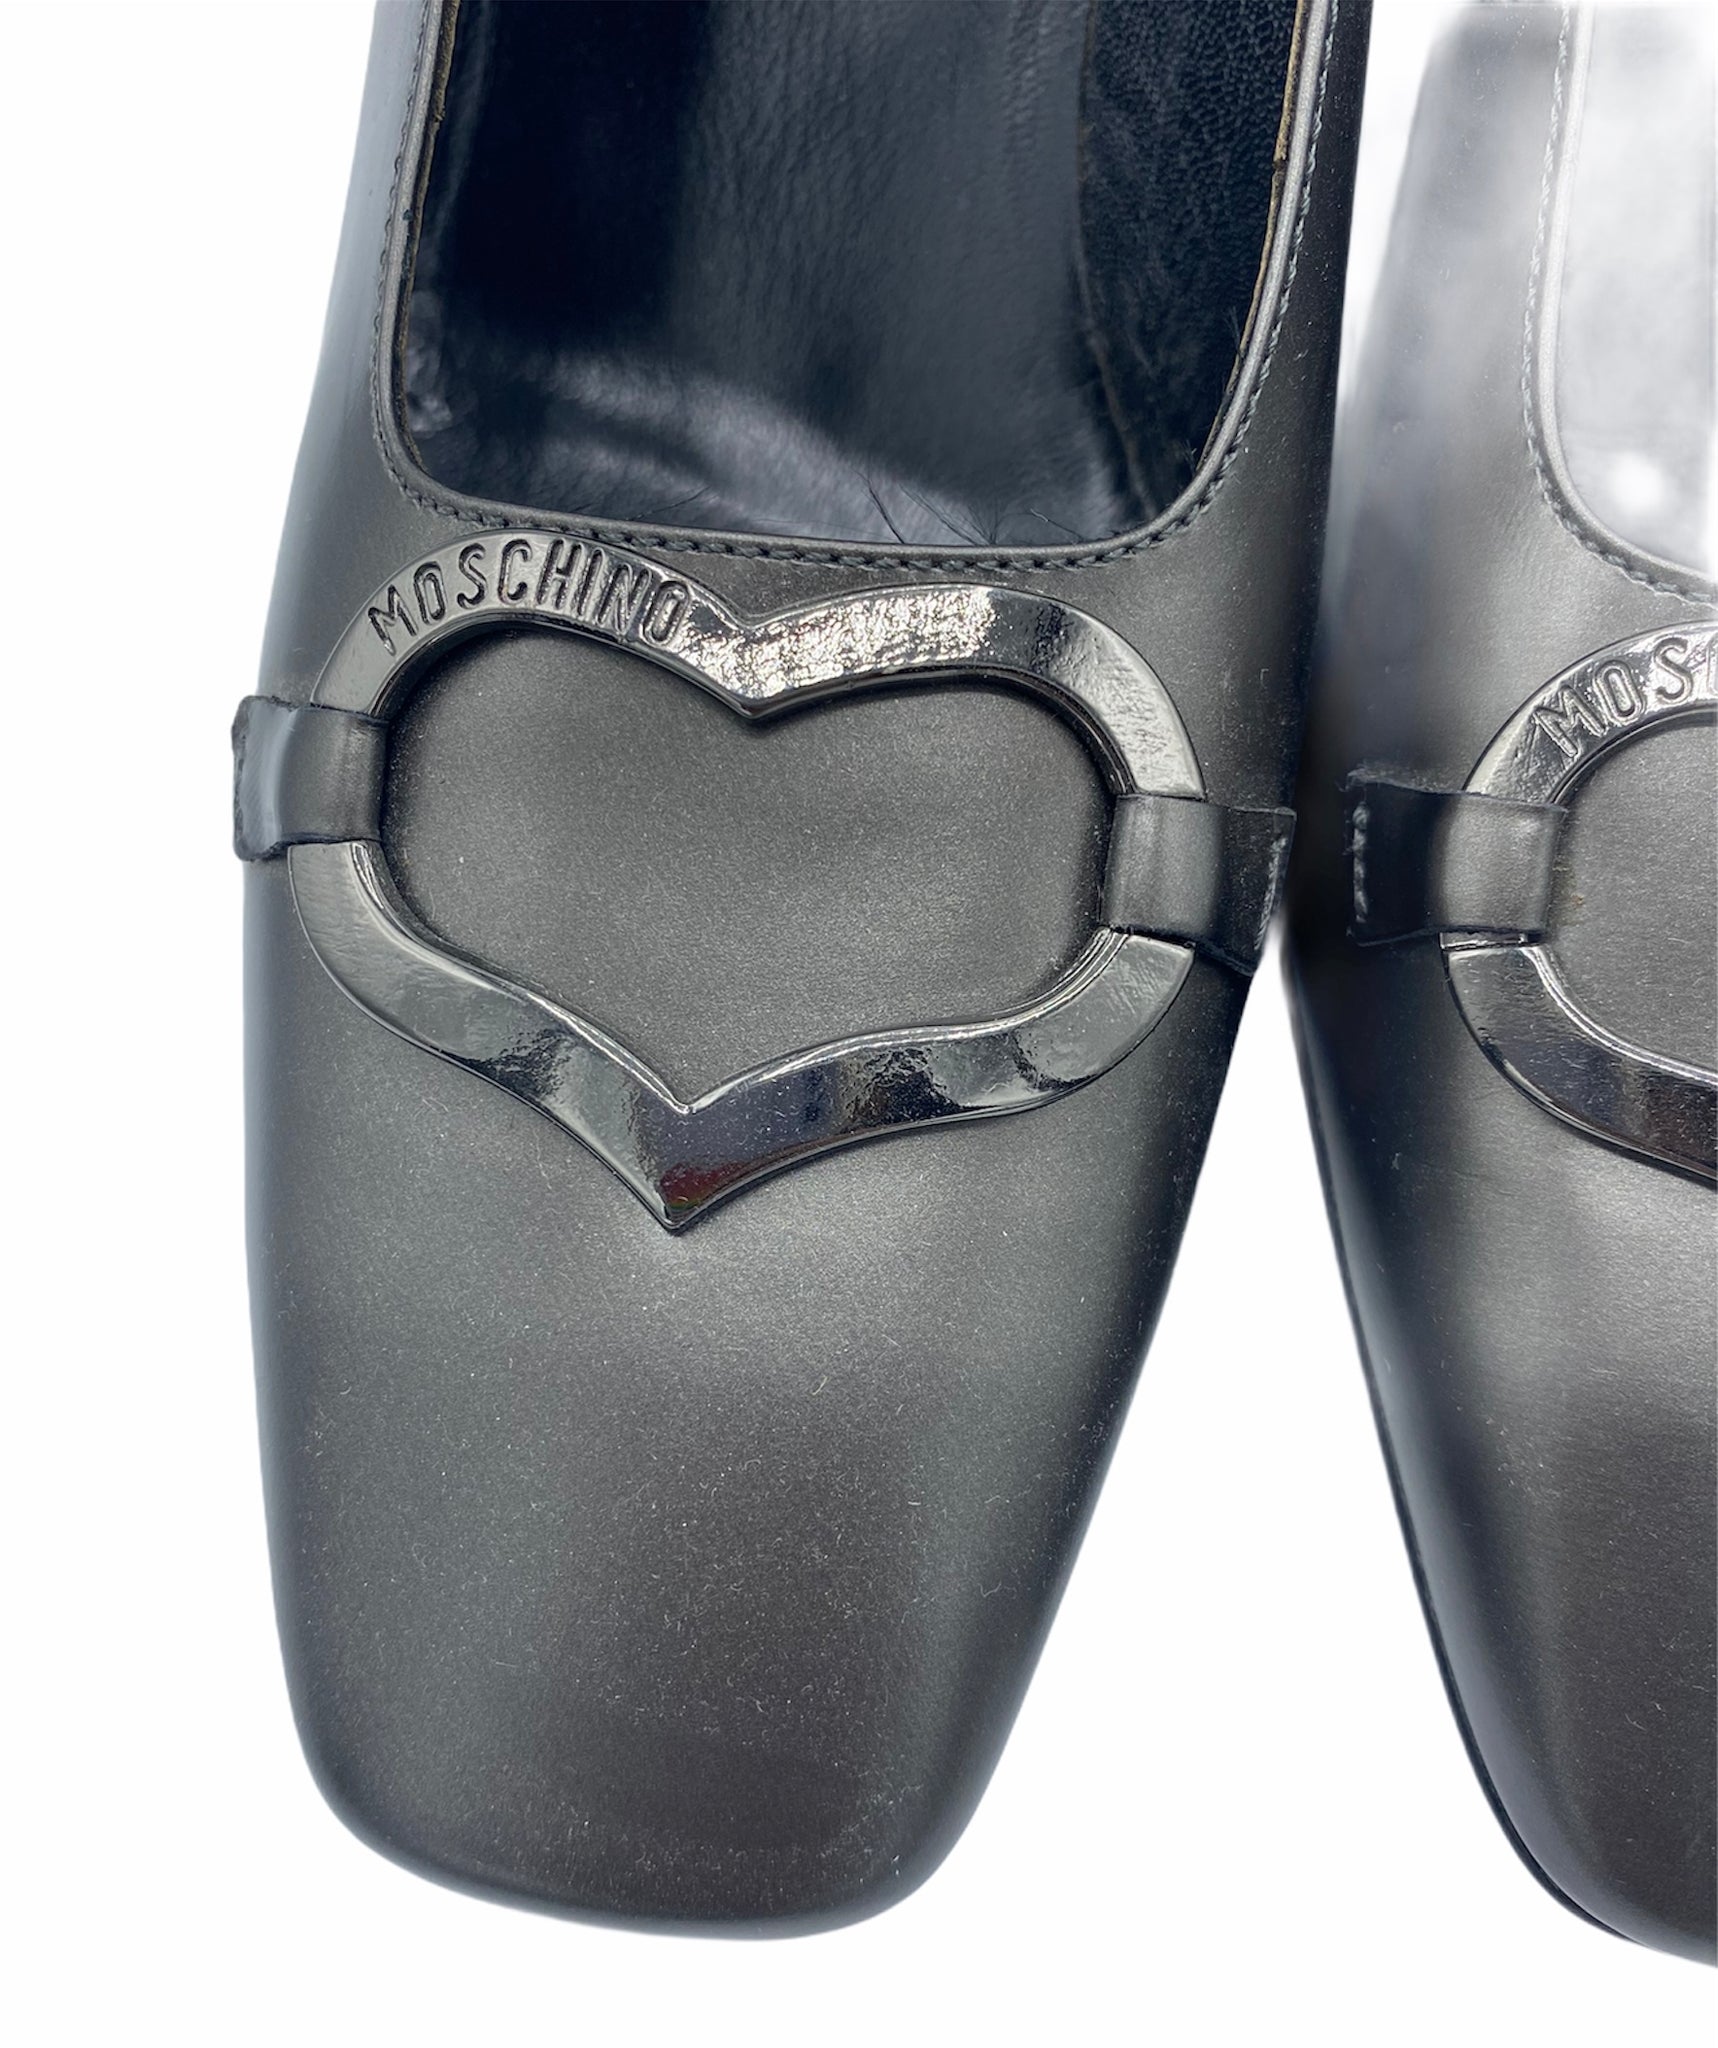 Moschino 90s Grey Pilgrim Pumps With Chrome Heart DETAIL 3 of 4